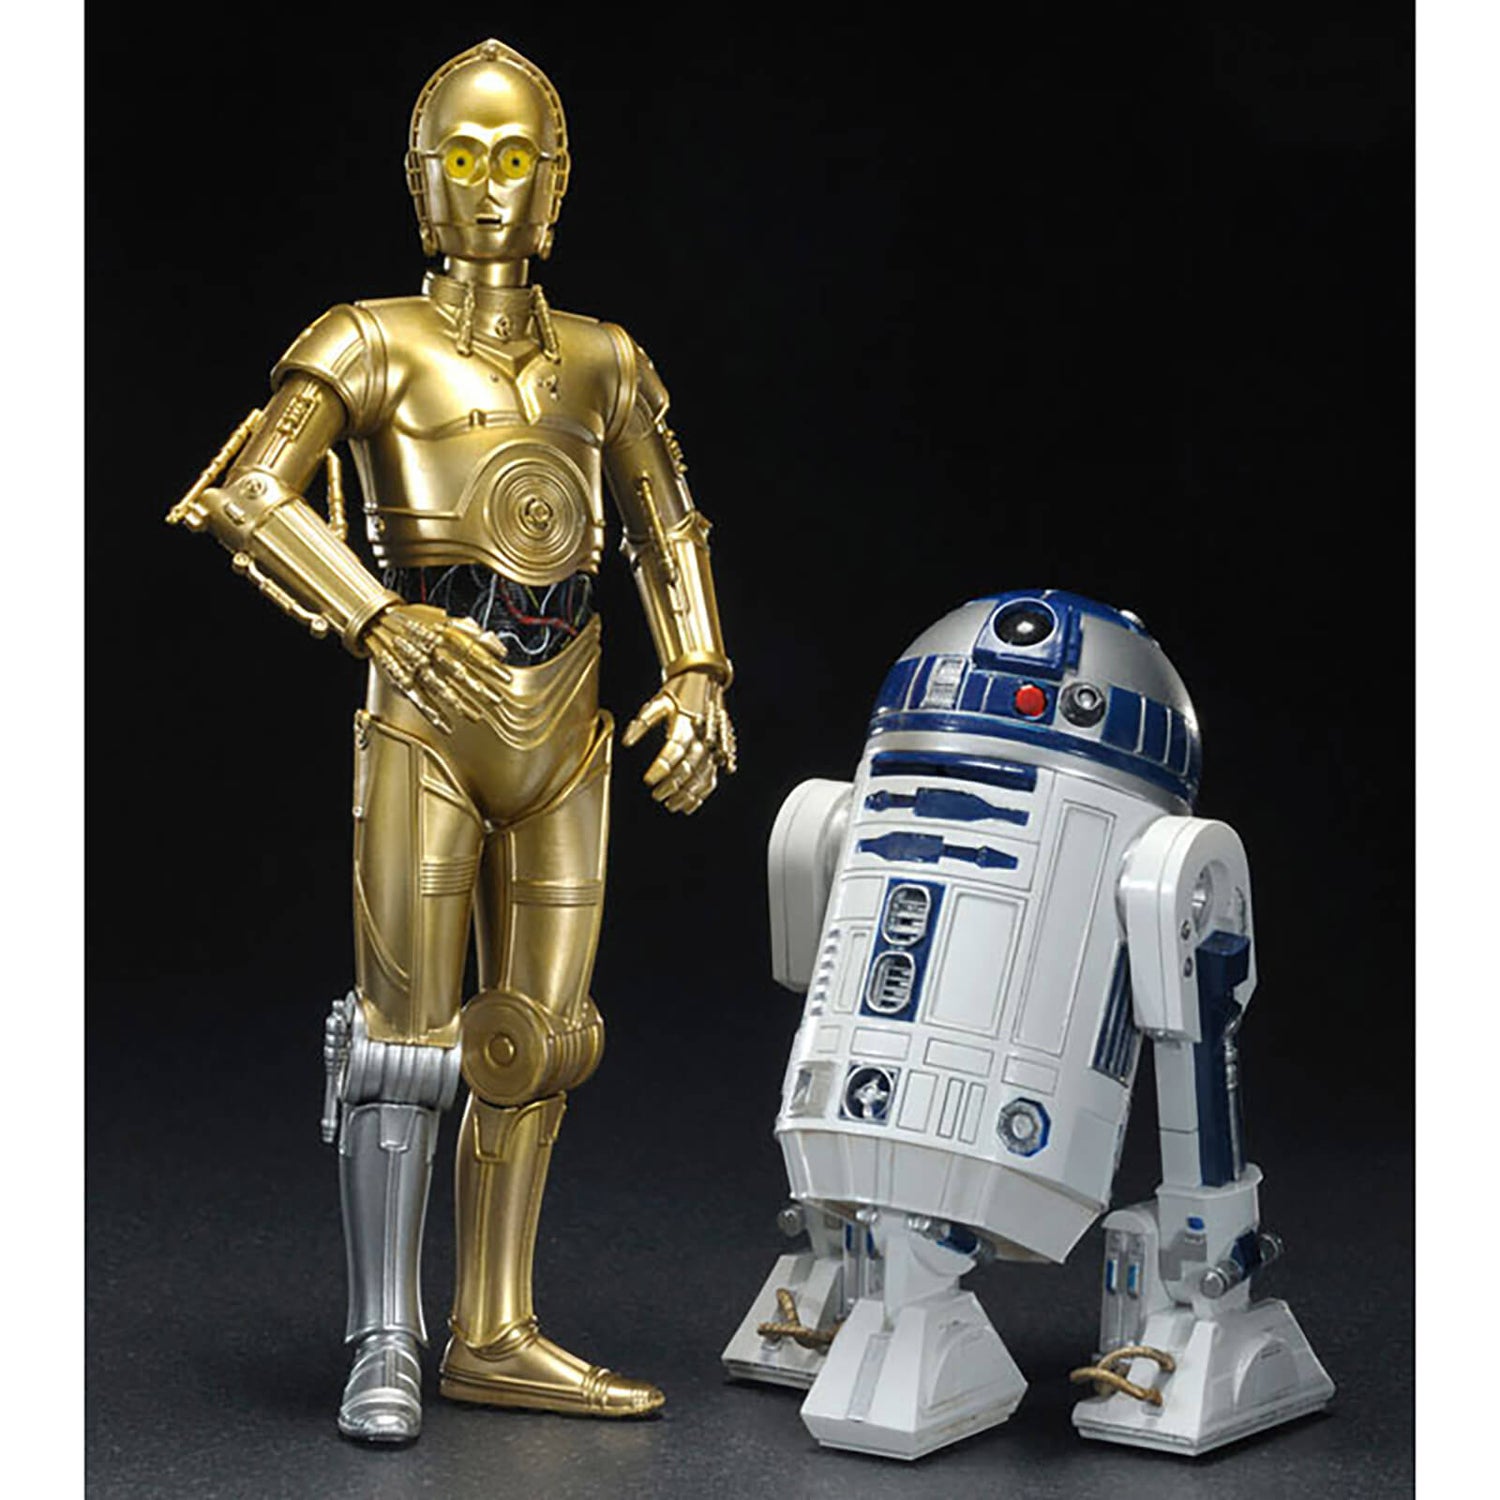 colby kennedy recommends Picture Of C3po And R2d2